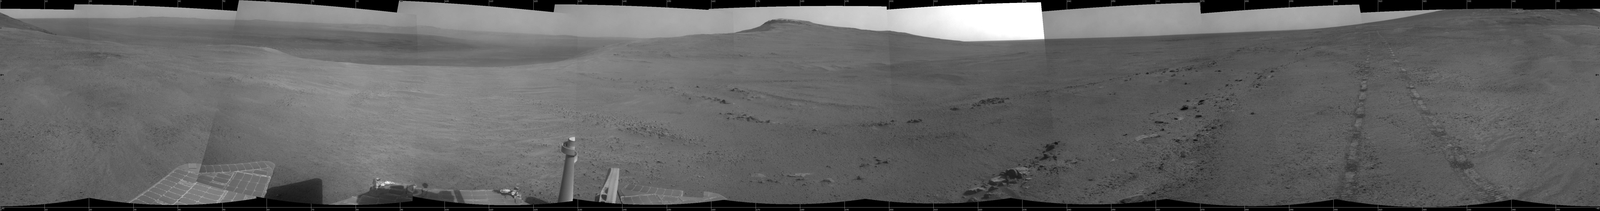 "Perseverance Valley" lies just on the other side of the dip in the crater rim visible in this view from the Navigation Camera (Navcam) on NASA's long-lived Mars Exploration Rover Opportunity, which arrived at this destination in early May 2017 in preparation for driving down the valley.